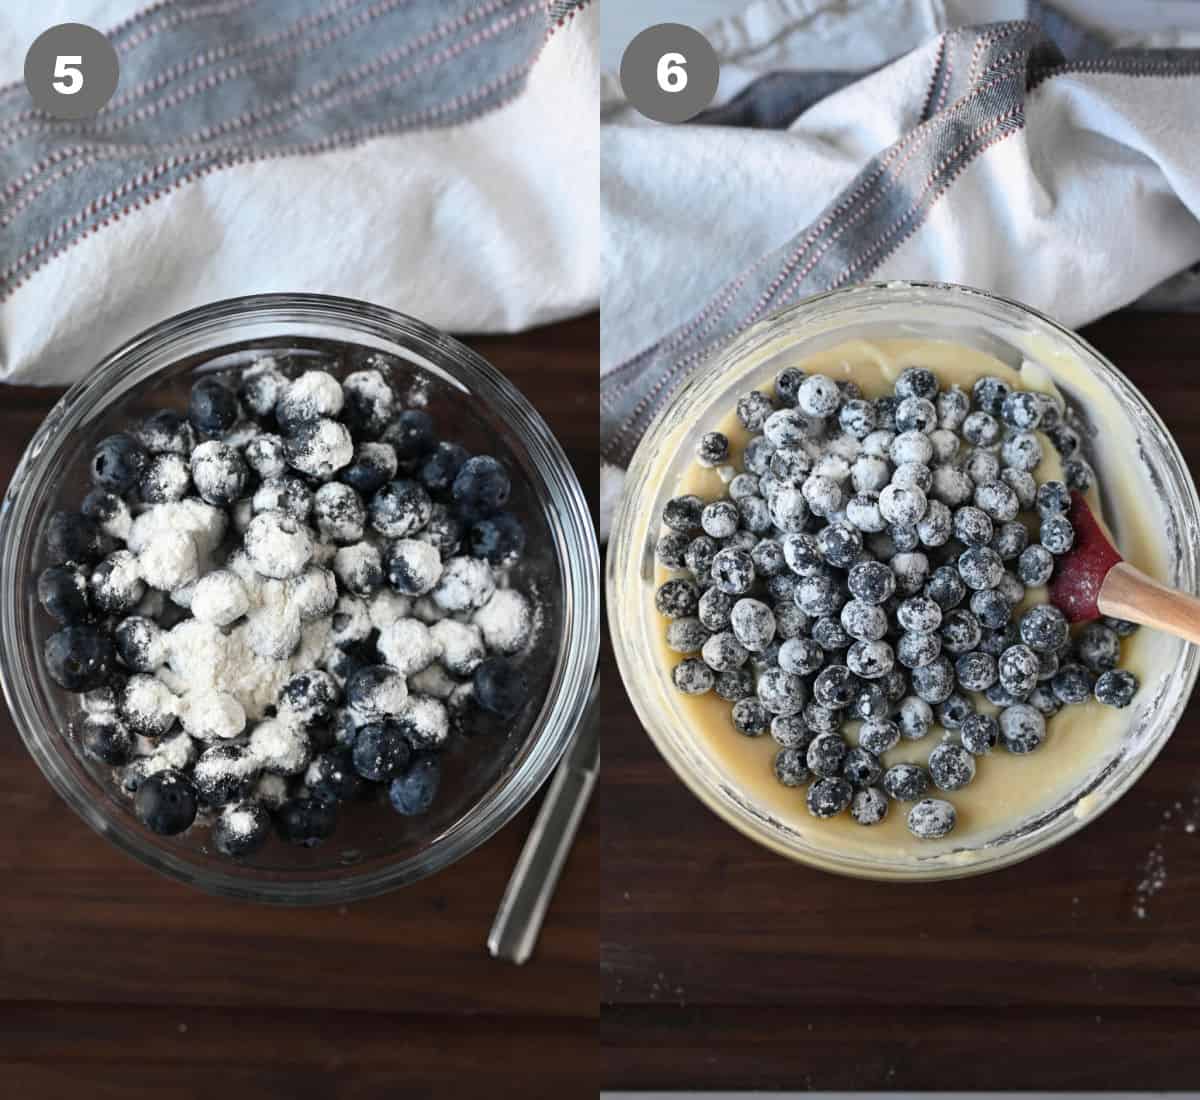 Blueberries tossed with flour then folded into the batter.